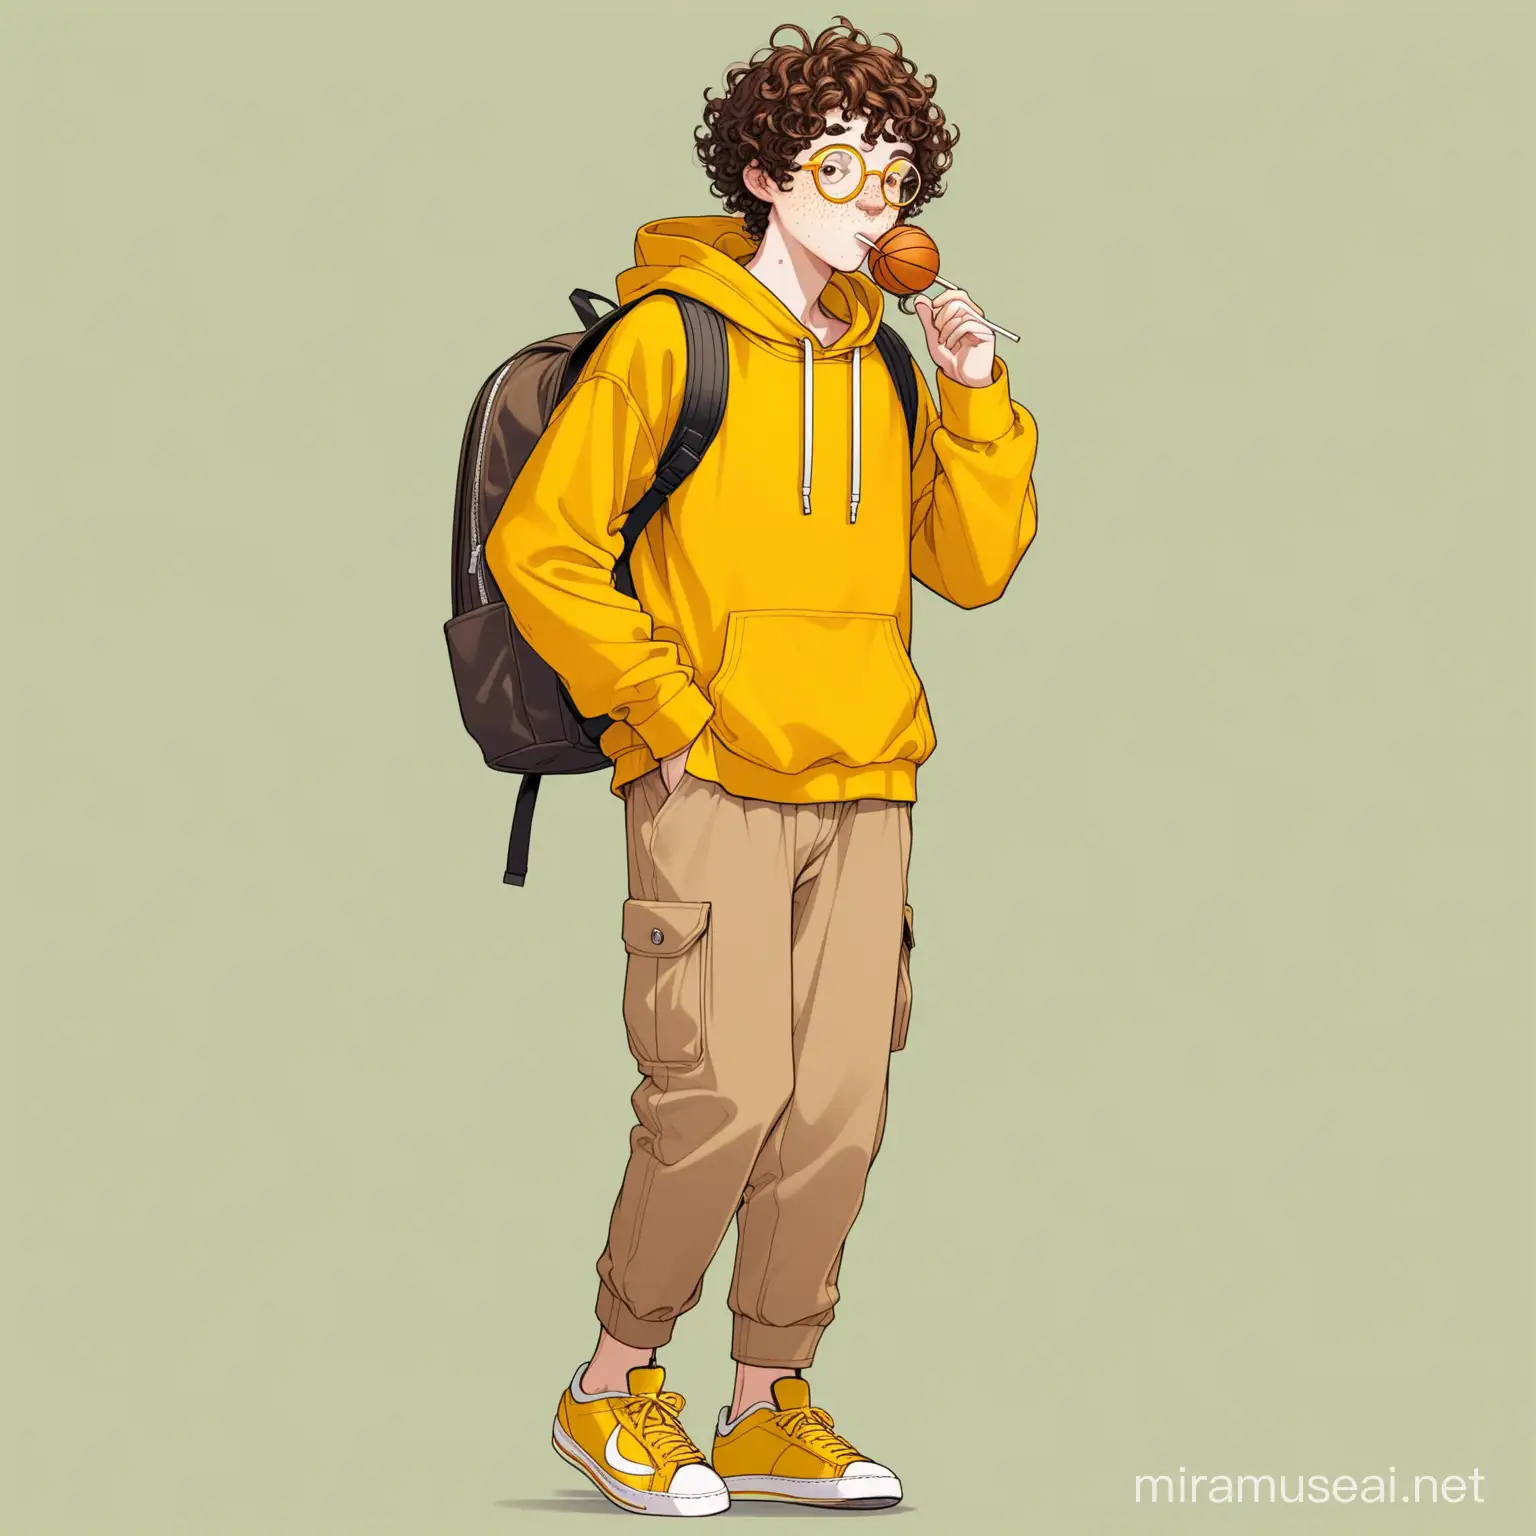 A teenage boy with curly brown hair, wearing a yellow hoodie, yellow round-rimmed glasses, white headphones around his neck and a lollipop in his mouth, wearing brown pants folded at the bottom, long yellow basketball shoes, carrying a backpack, and freckles around his nose.